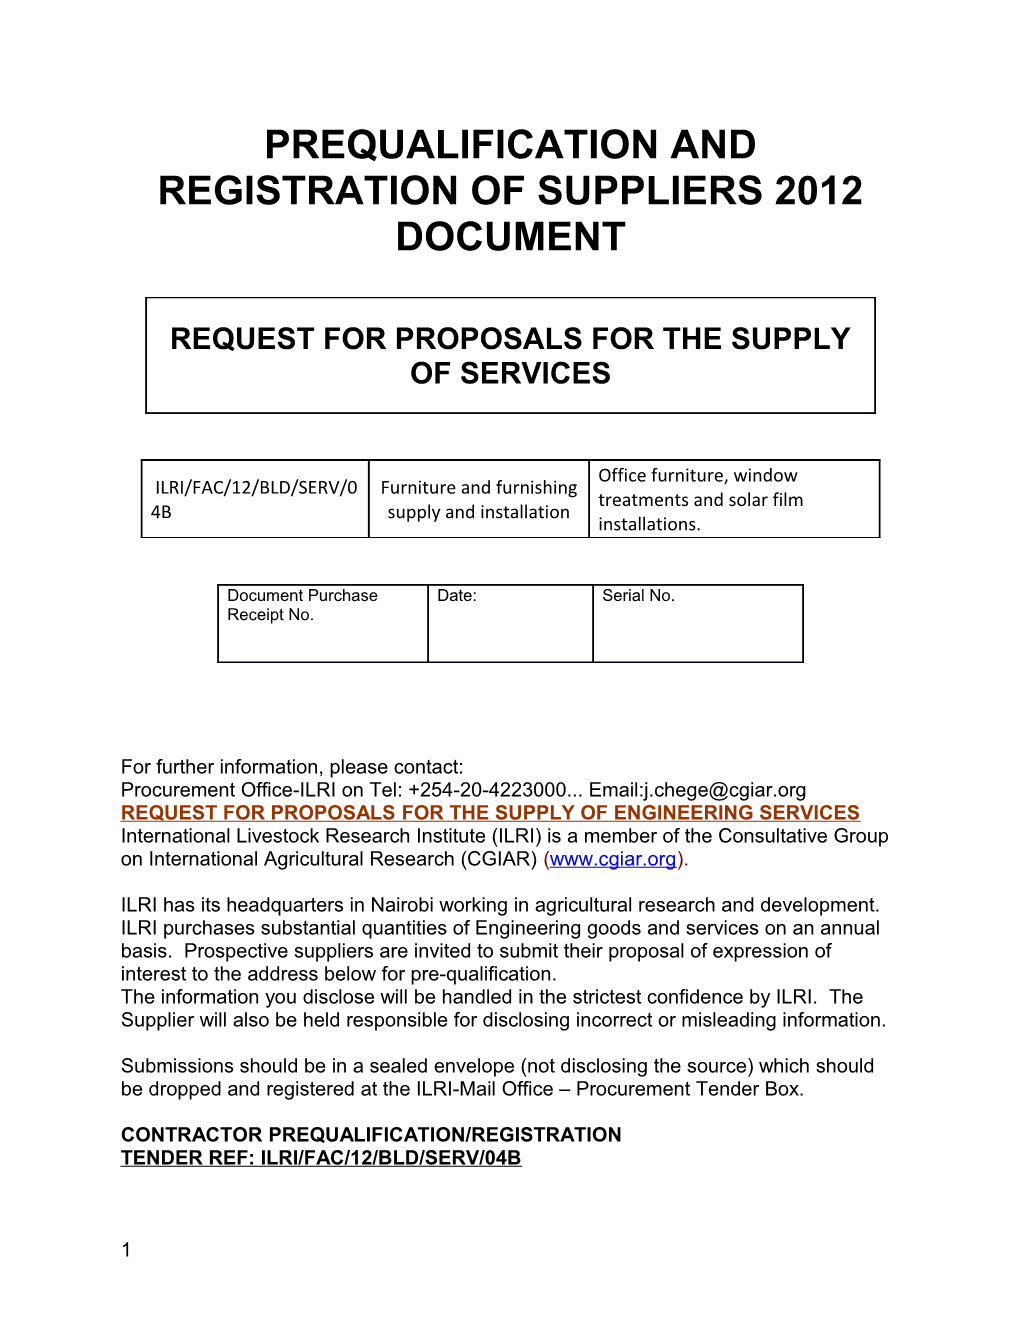 Prequalification and Registration of Suppliers 2012